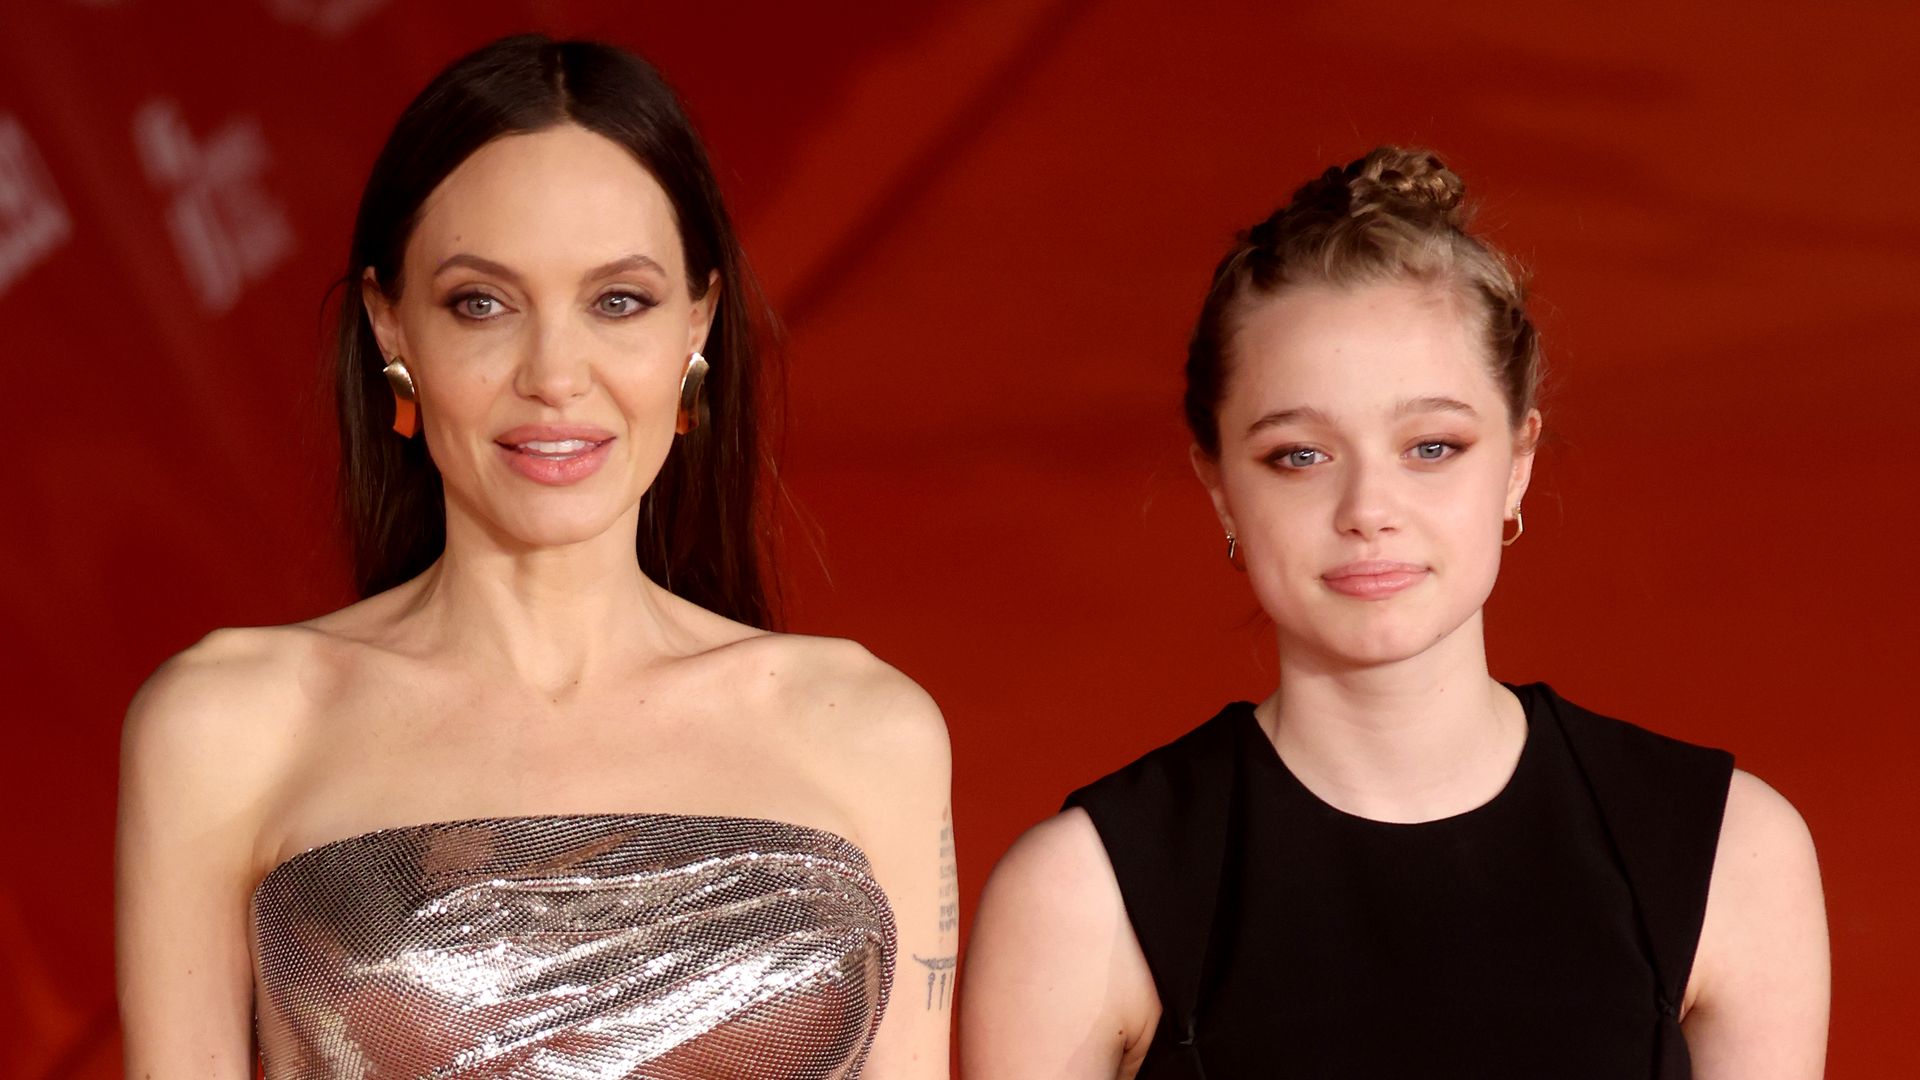 Brad Pitt and Angelina Jolie's daughter Shiloh makes legal request to drop dad's surname